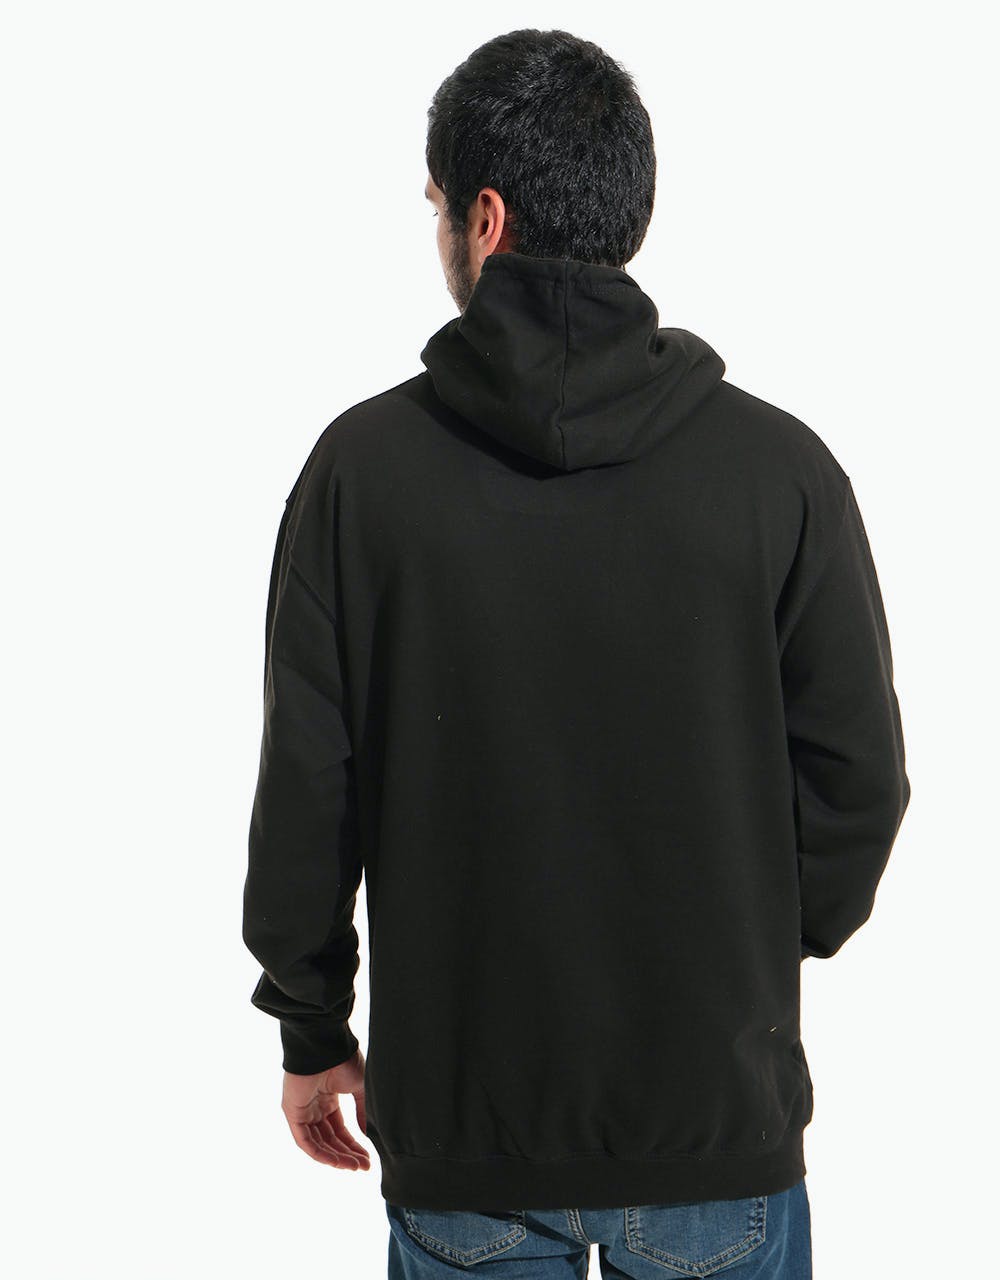 Route One Symbolism Pullover Hoodie - Black